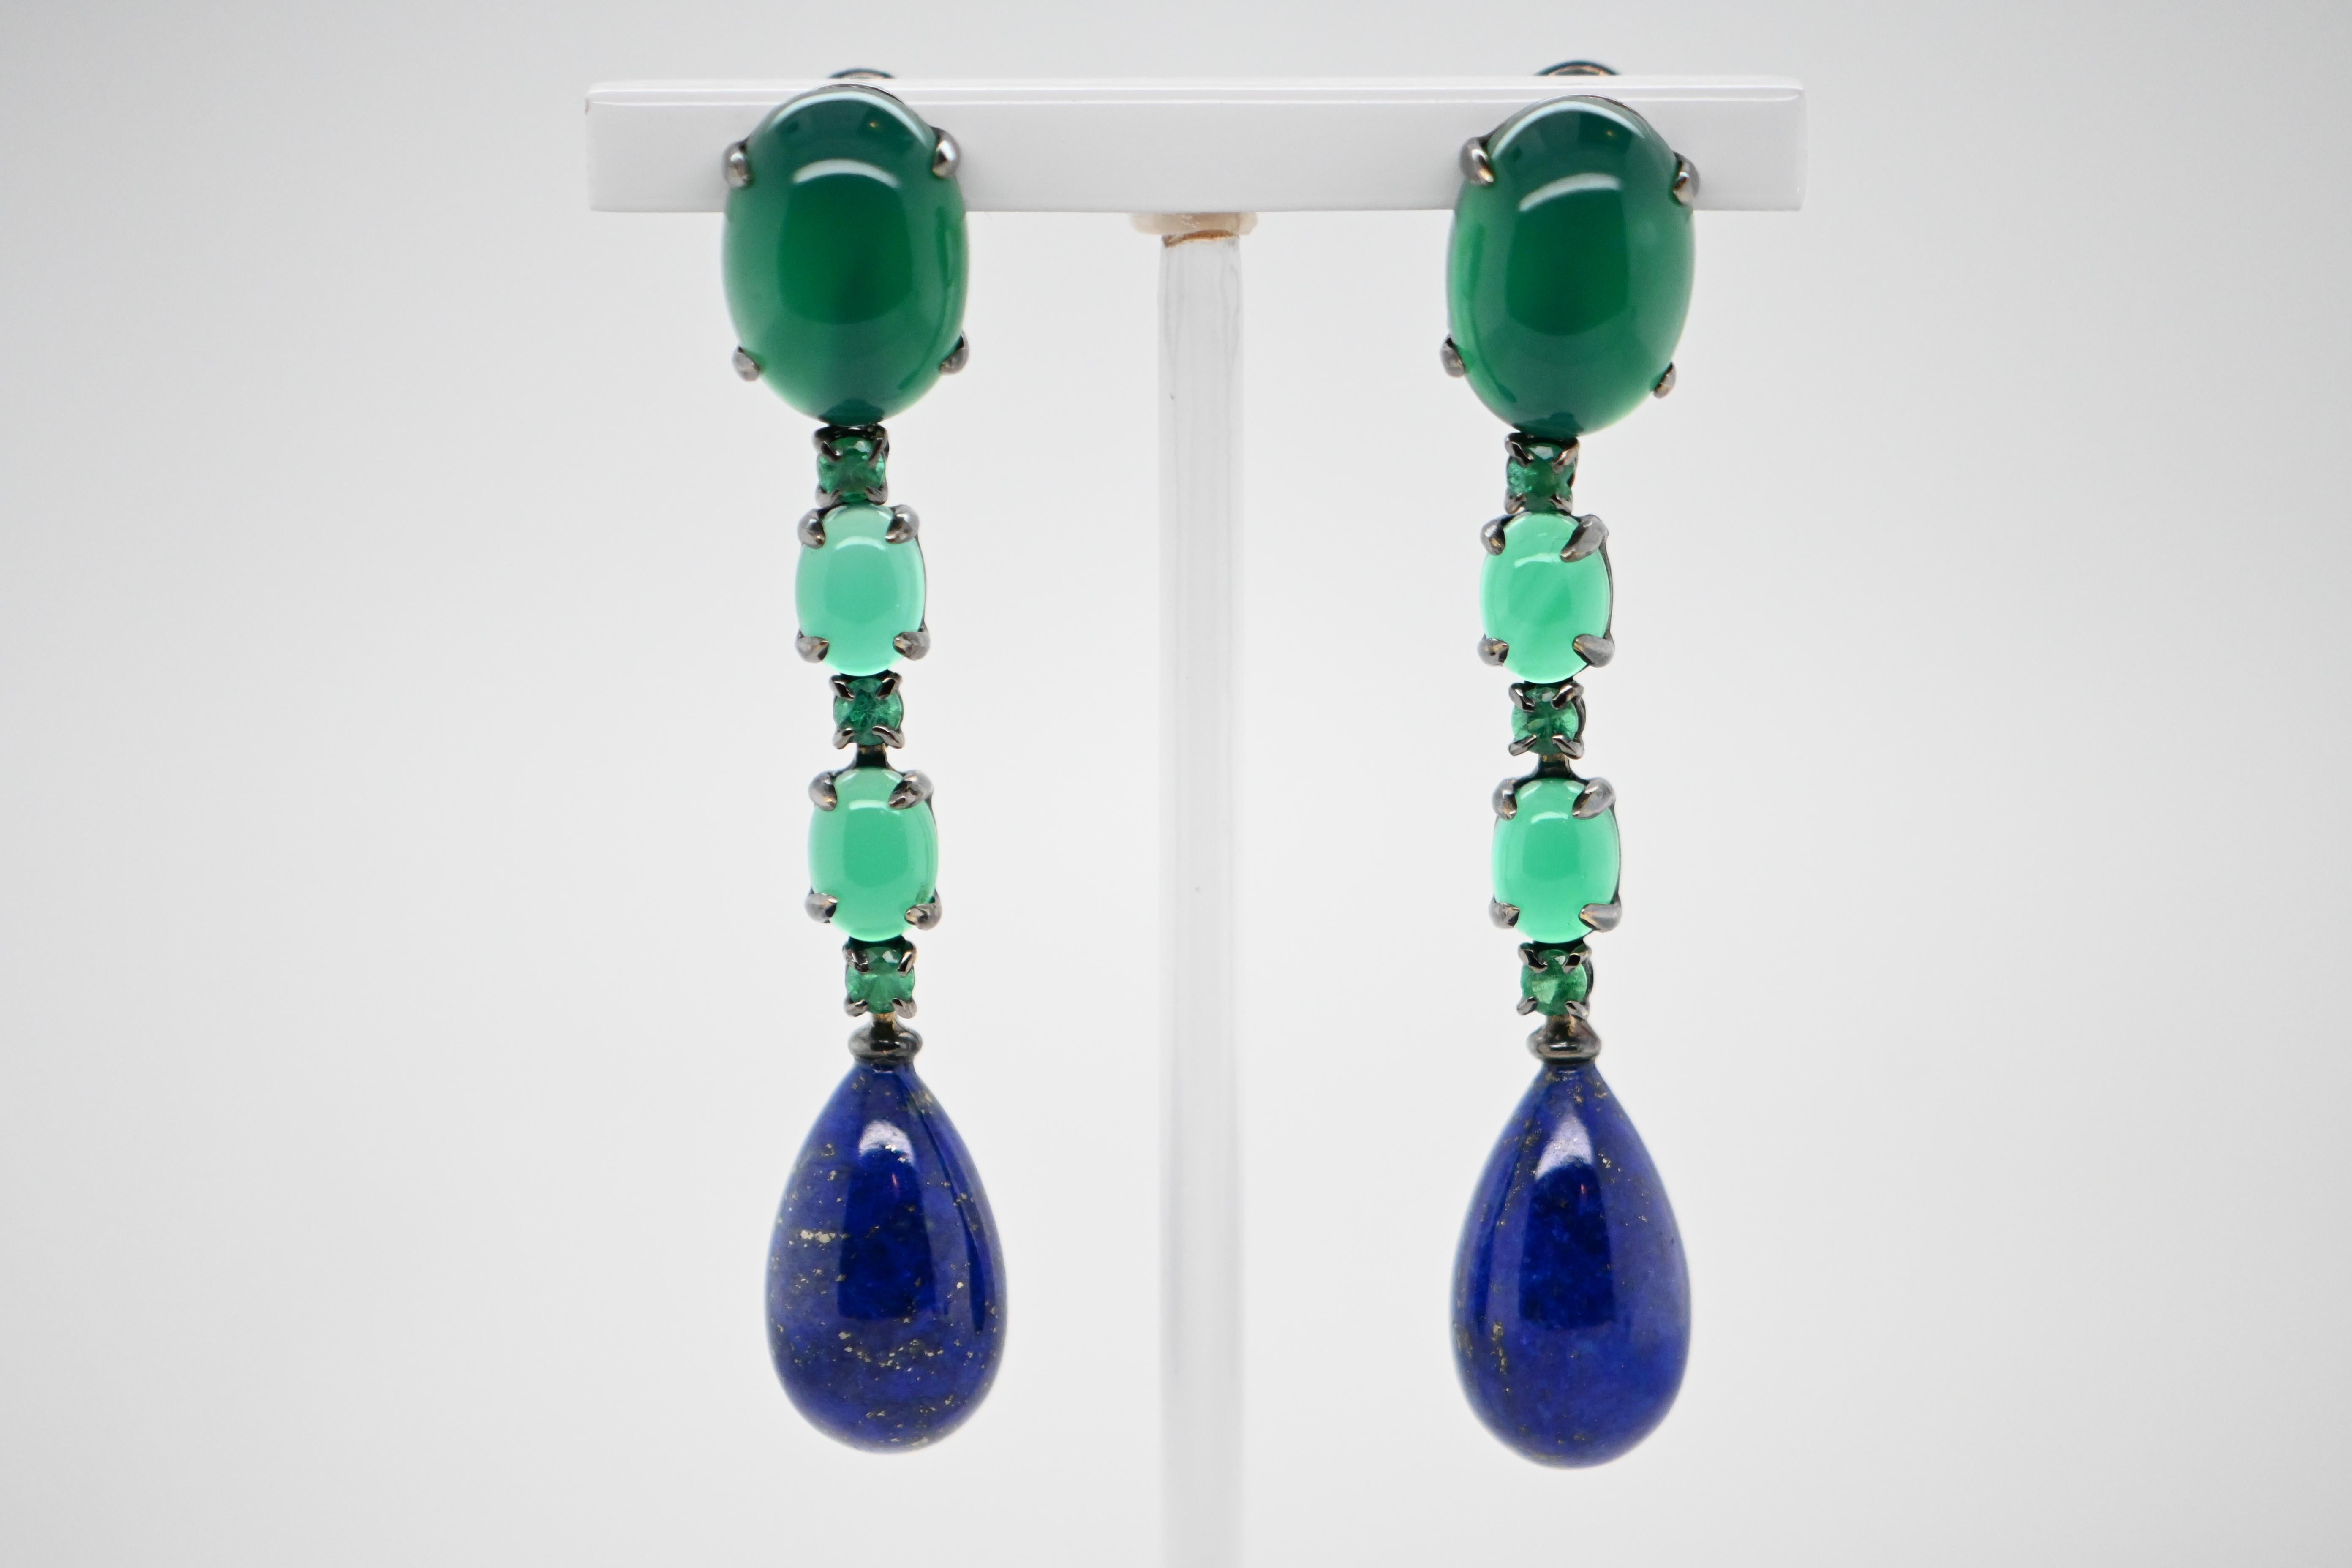 Discover these sumptuous chandelier earrings in Green Agate and Lapis Lazuli, beautifully set off by an 18-carat white gold backing. These exceptional jewels are the perfect marriage between the beauty of natural stones and the timeless elegance of